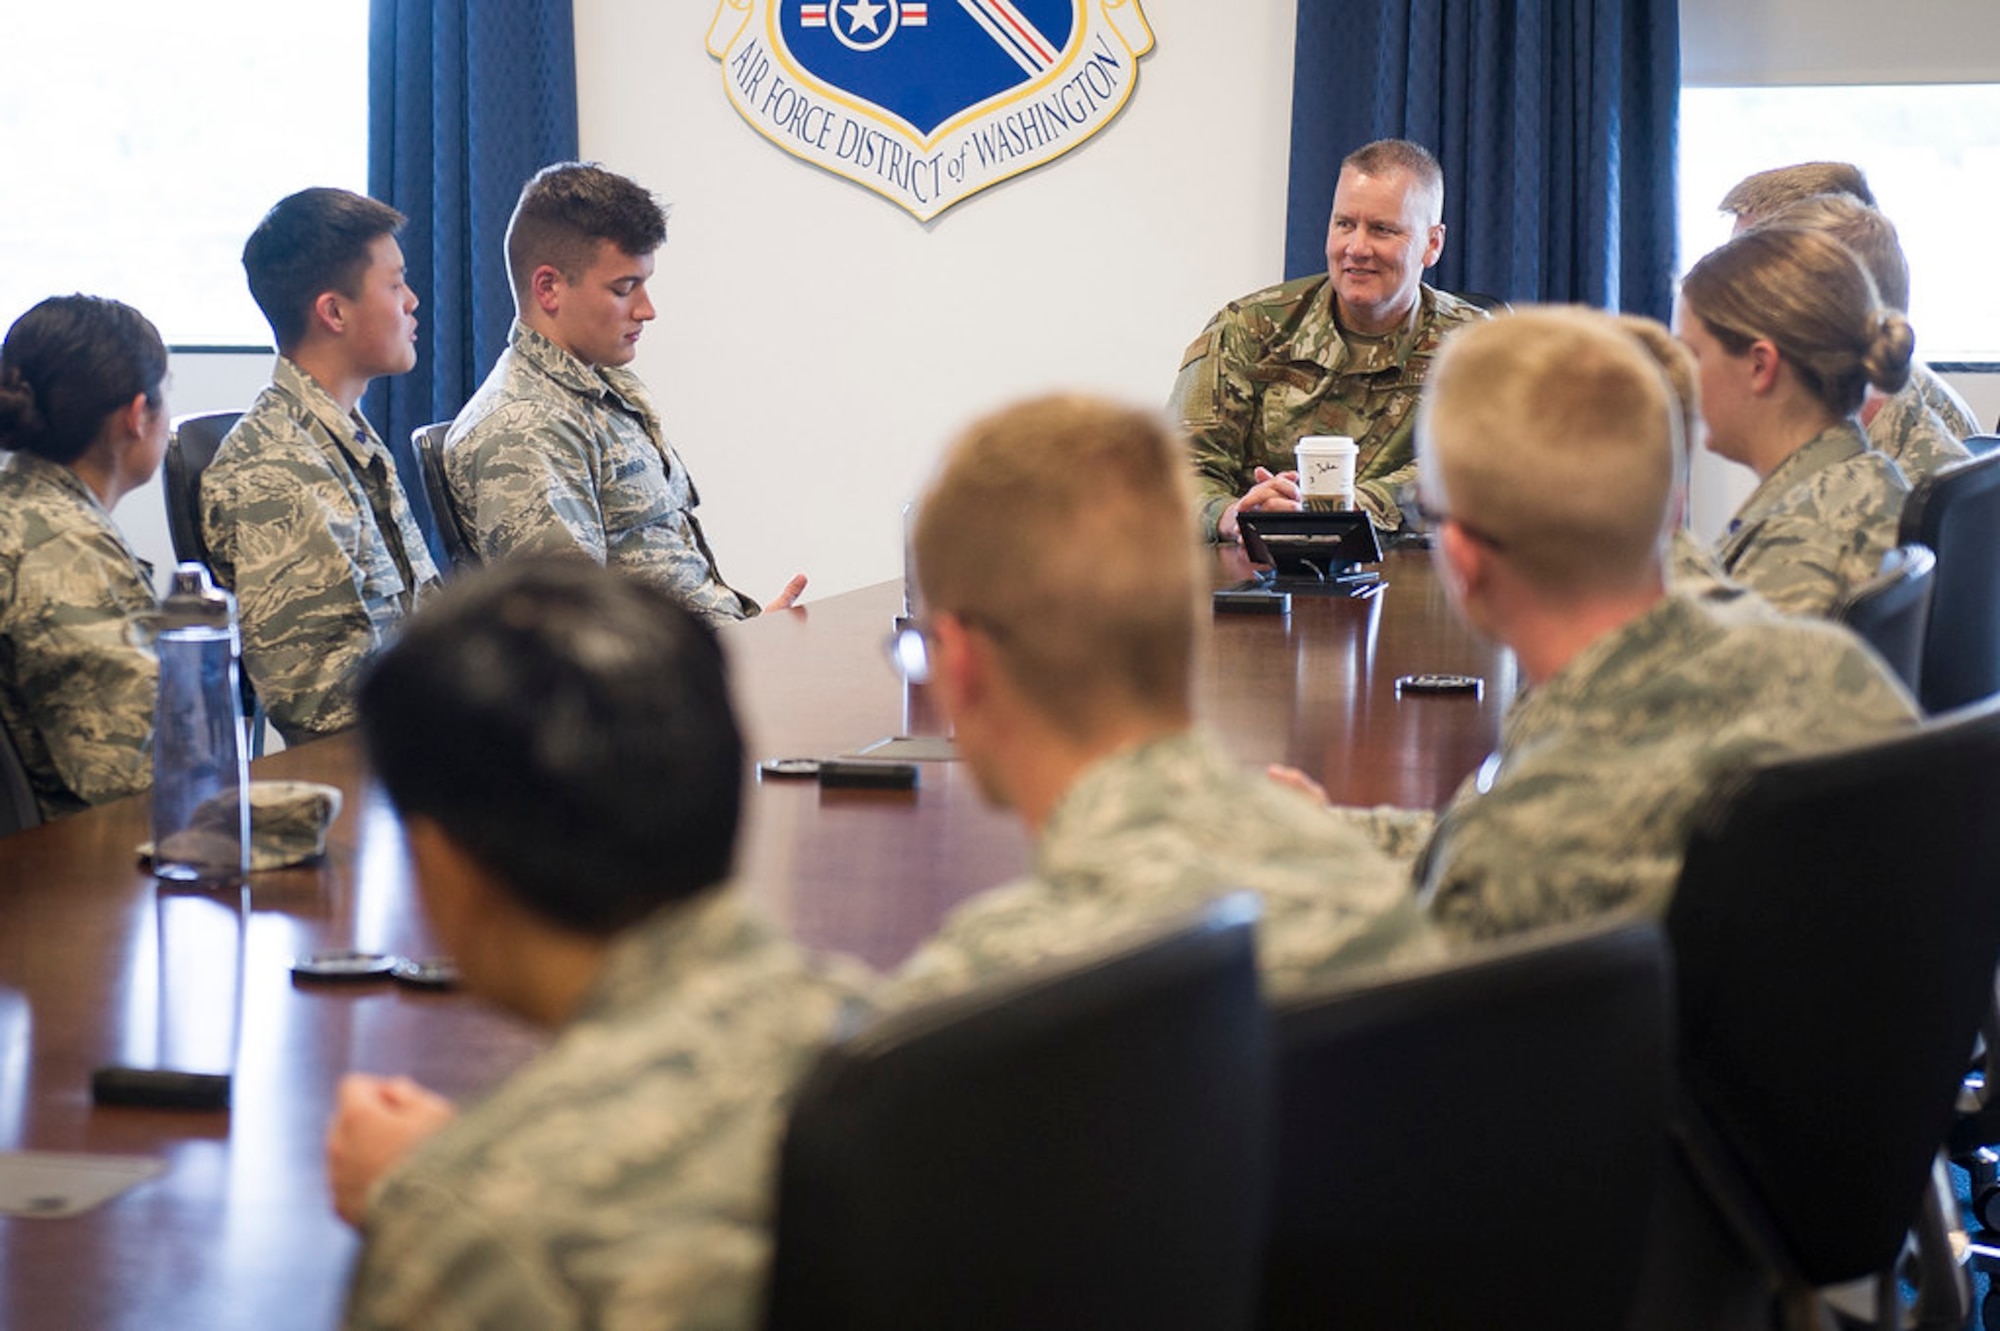 Maj. Gen. James A. Jacobson, Air Force District of Washington commander, listens to questions from ROTC Cadets from universities across the country at Joint Base Andrews, Md., May 22, 2019. Jacobson gave leadership insights, answered questions and discussed how important innovative Airmen are for the future of the Air Force. (U.S. Air Force photo by Master Sgt. Michael B. Keller)